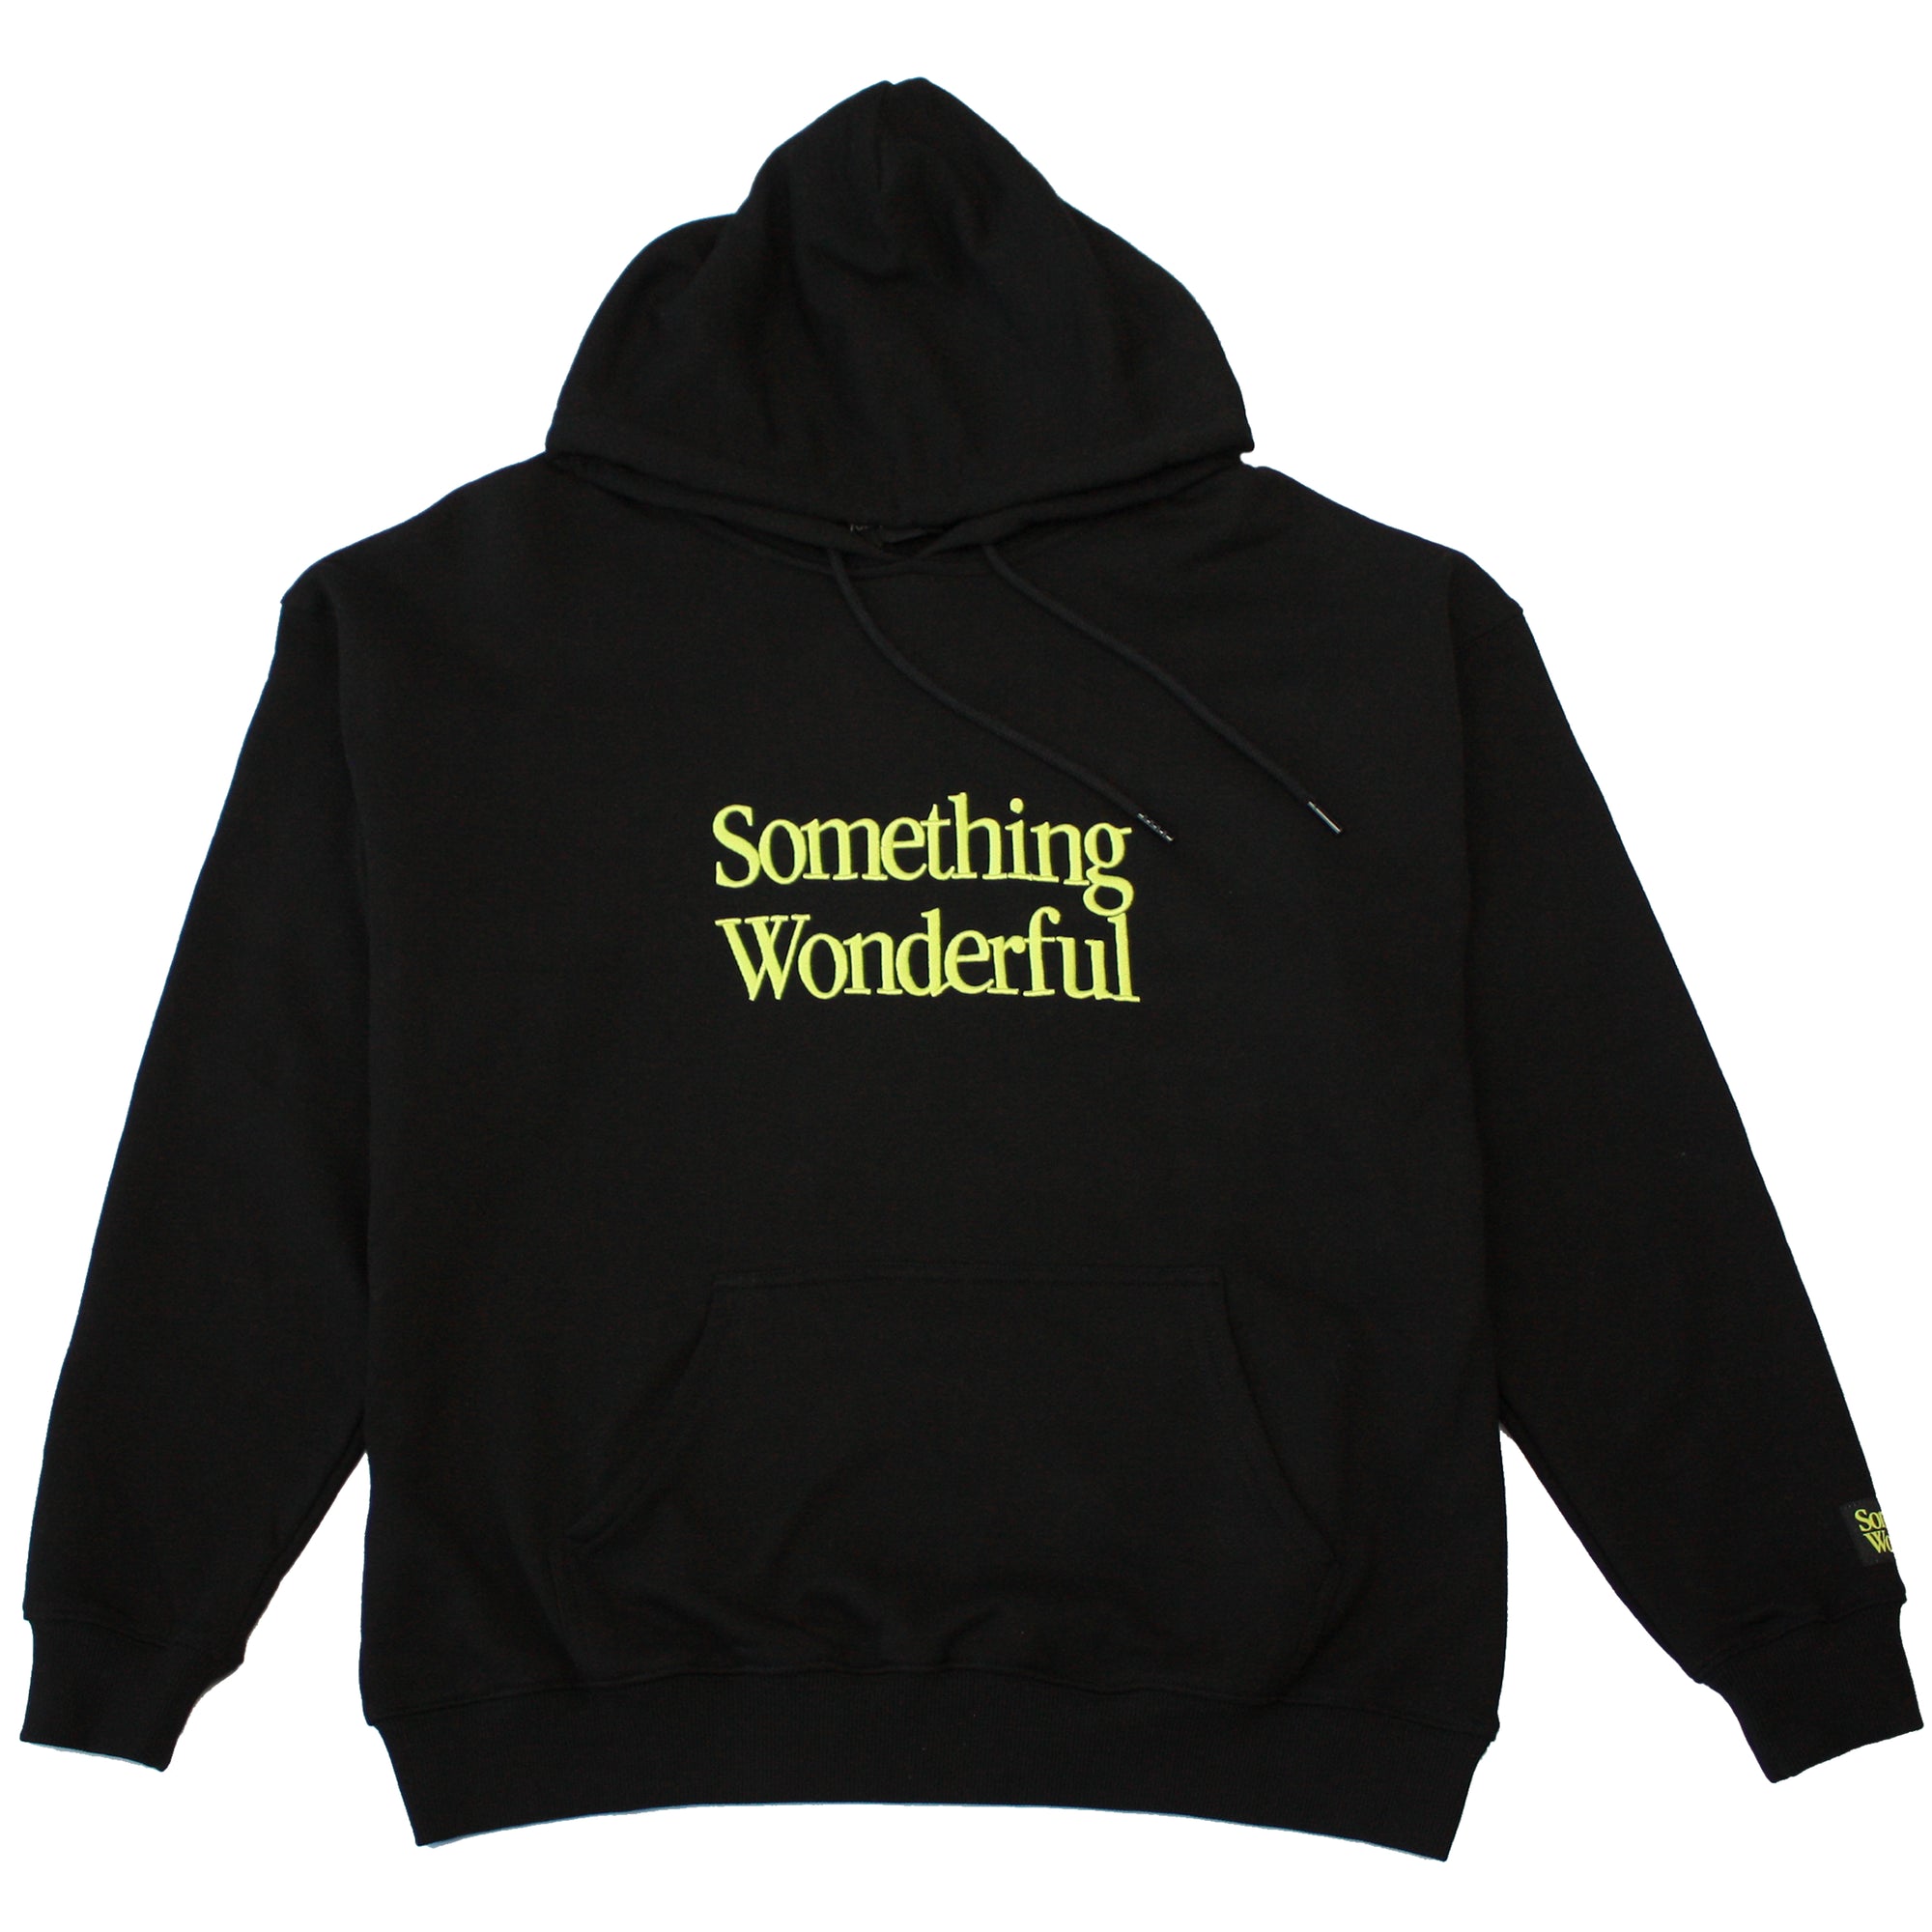 Black hoody with embroidered green logo